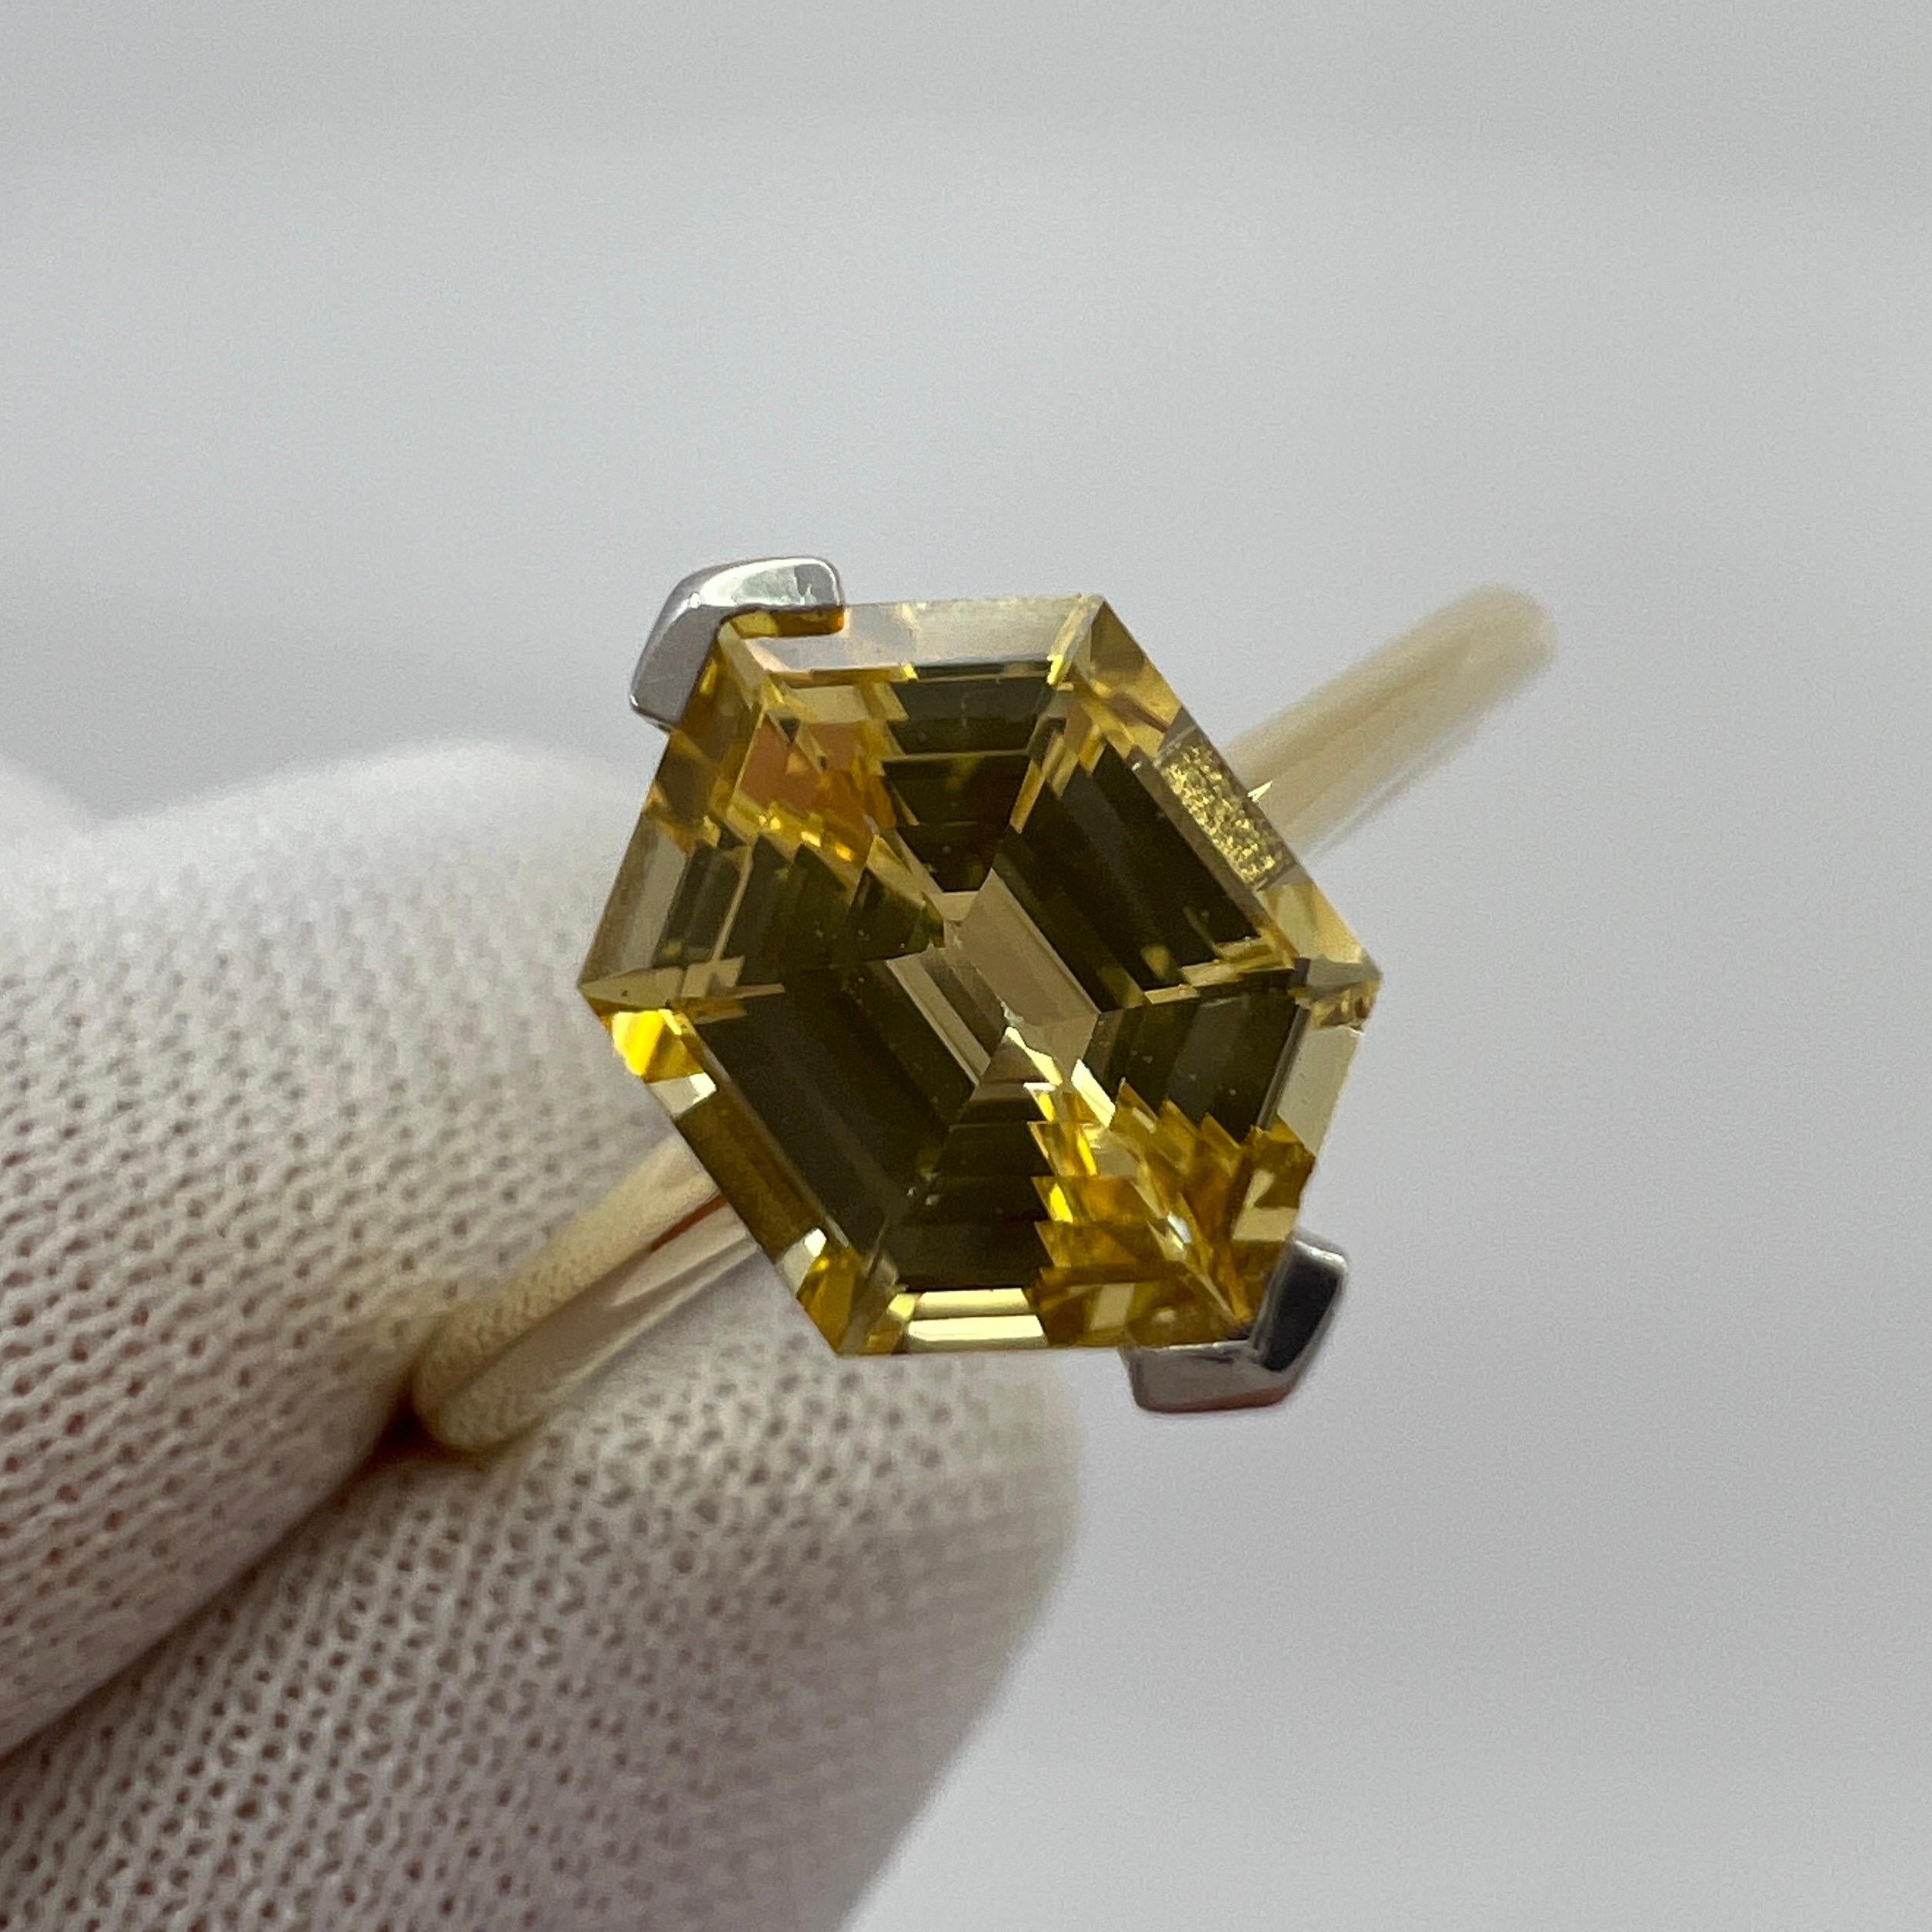 Fine GIA Certified Untreated Yellow Ceylon Sapphire 18k Gold Solitaire Ring.

Certified 1.68 carat fine yellow sapphire with a stunning vivid colour, excellent clarity and an excellent fancy hexagonal cut. Unique and top grade gemstone mined in Sri